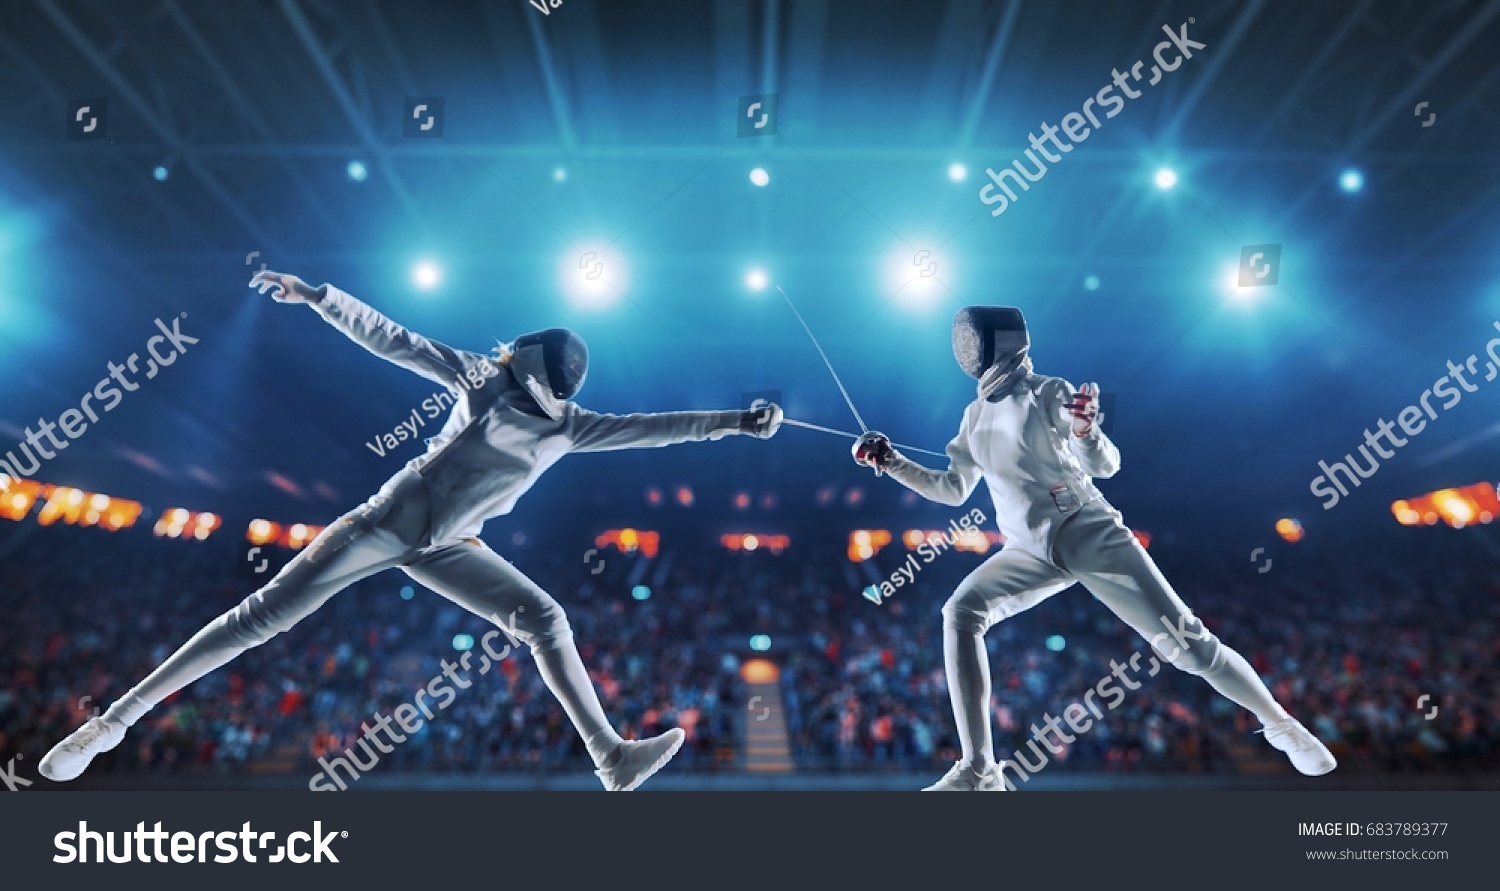 Two female fencing athletes fight on professional sports arena with spectators and lense-flares. Women wear unbranded sports clothes. Arena is made in 3D. #683789377